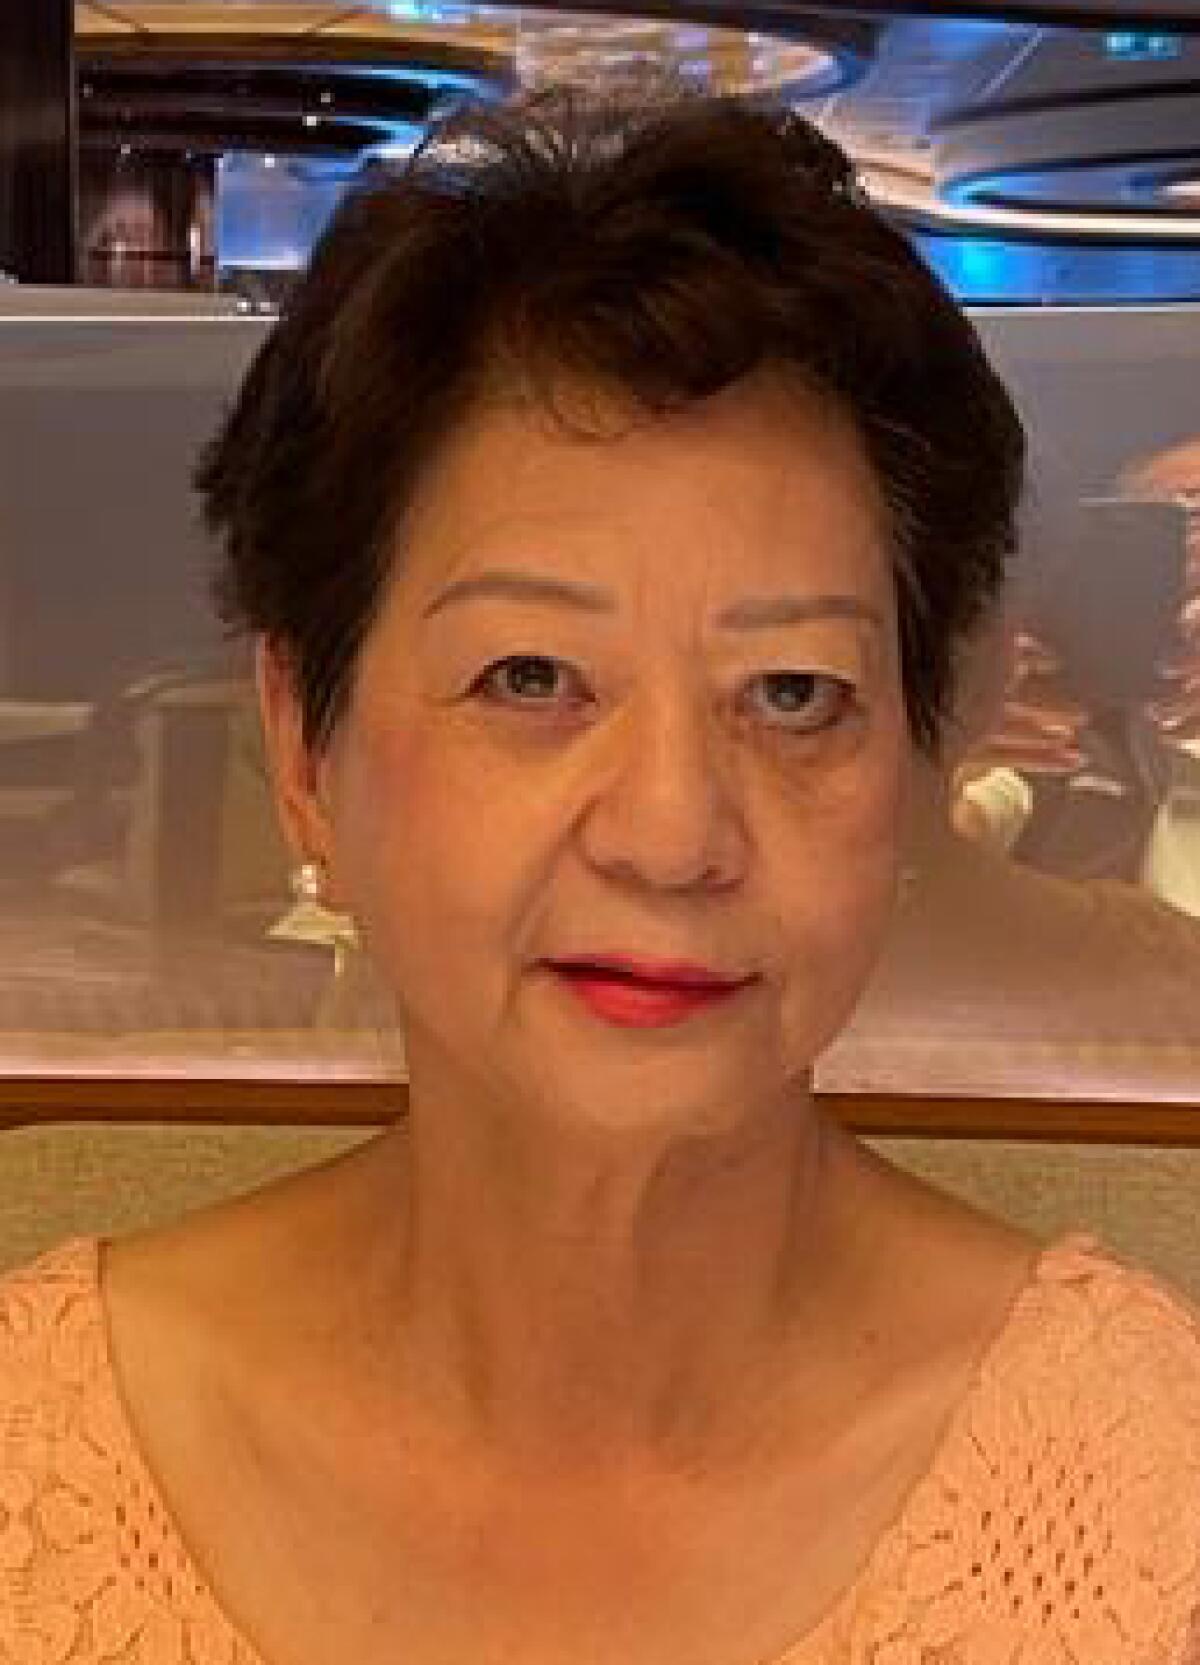 A woman with short brown hair wearing earrings, red lipstick and a peach-colored shirt